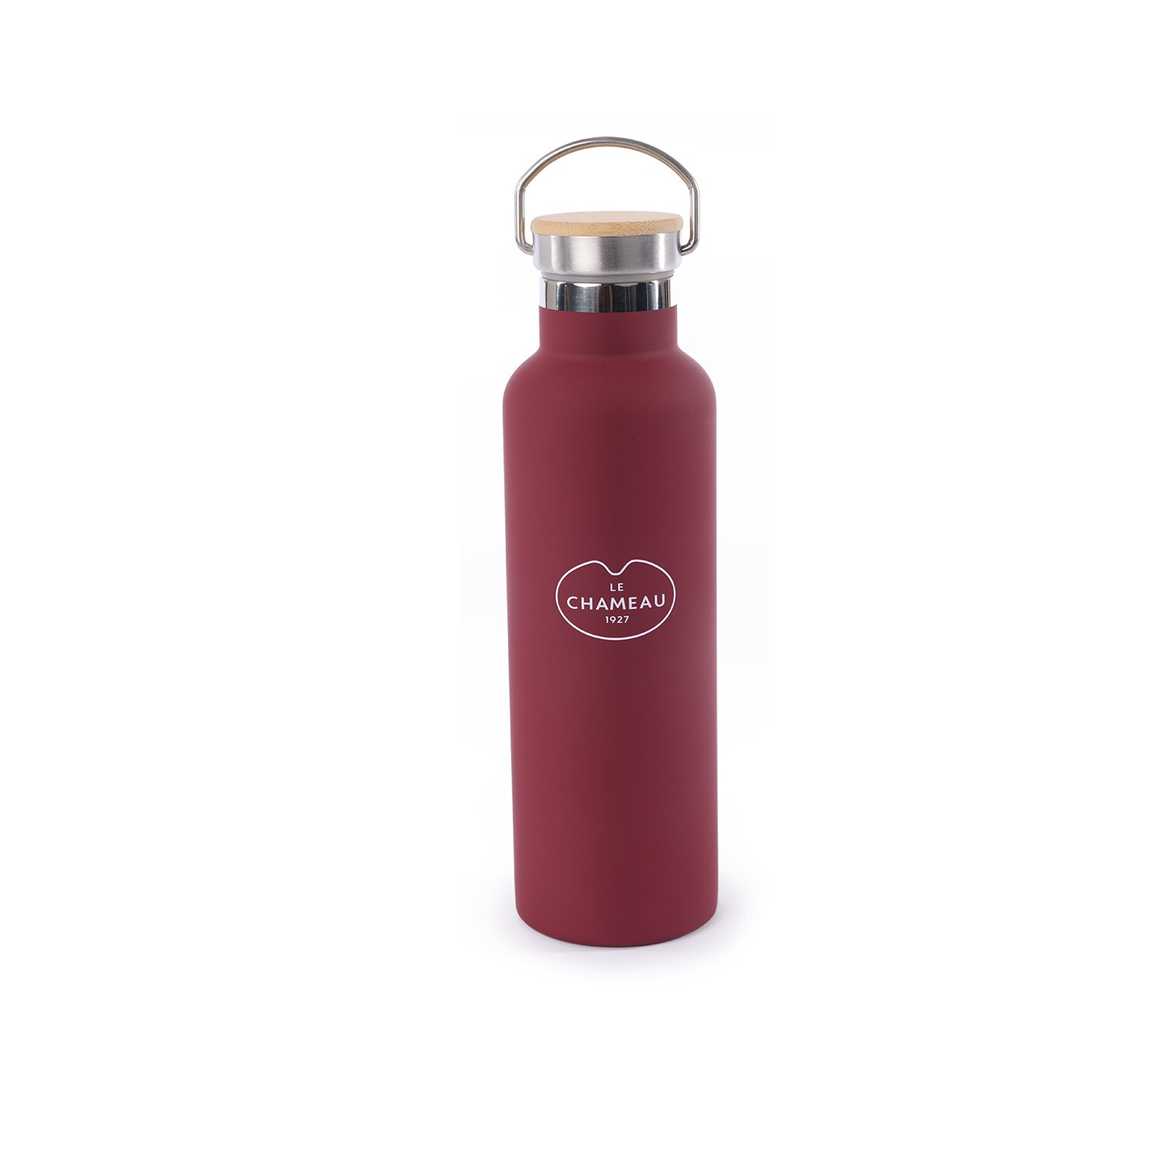 Le Chameau Water Bottle - Cherry Red